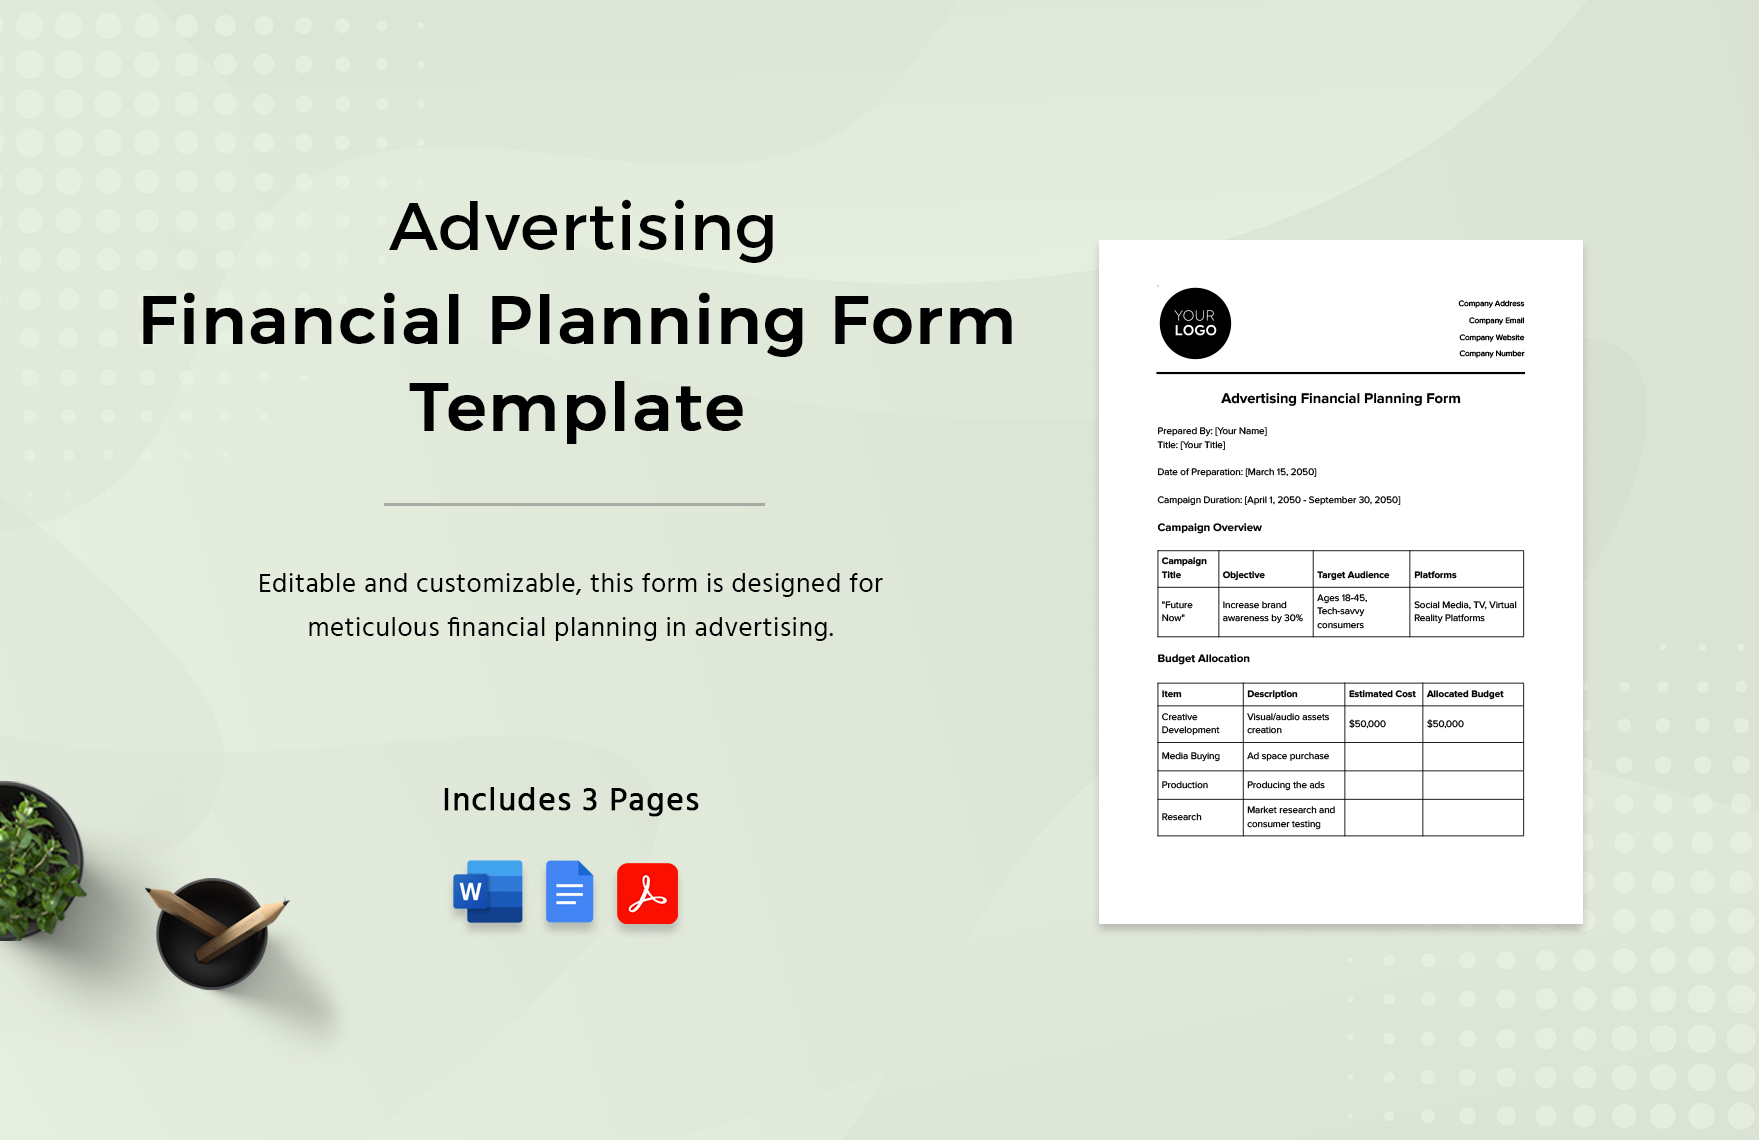 Advertising Financial Planning Form Template in Word, Google Docs, PDF